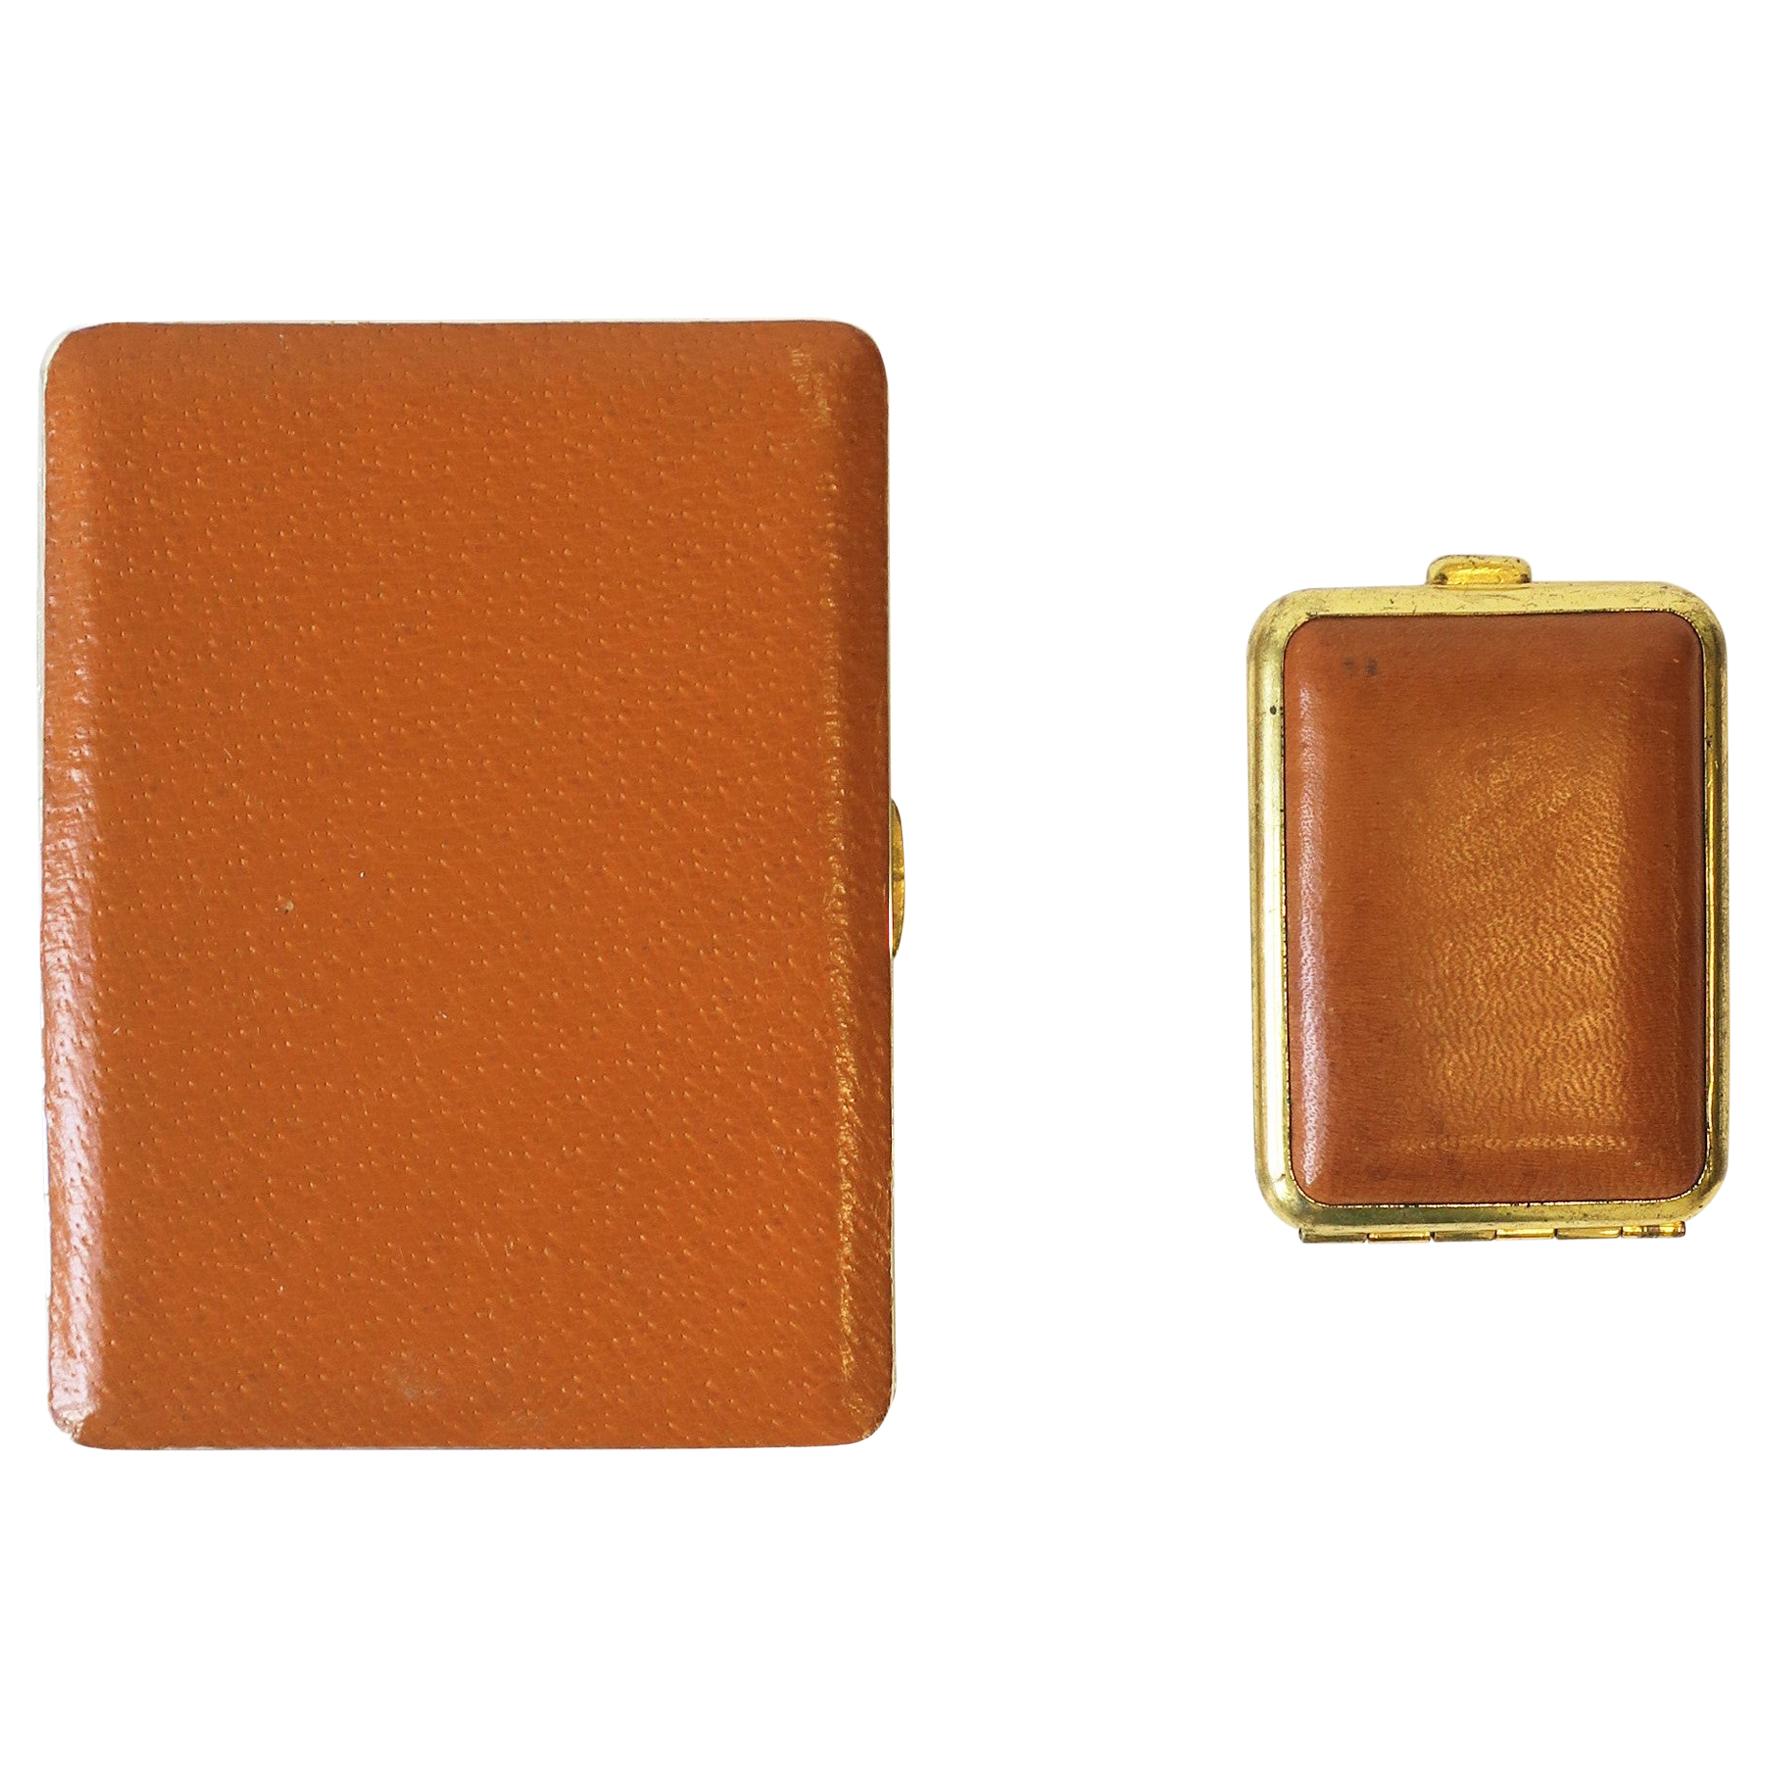 English Leather and Brass Cigarette and Matchbox Holder Case Set